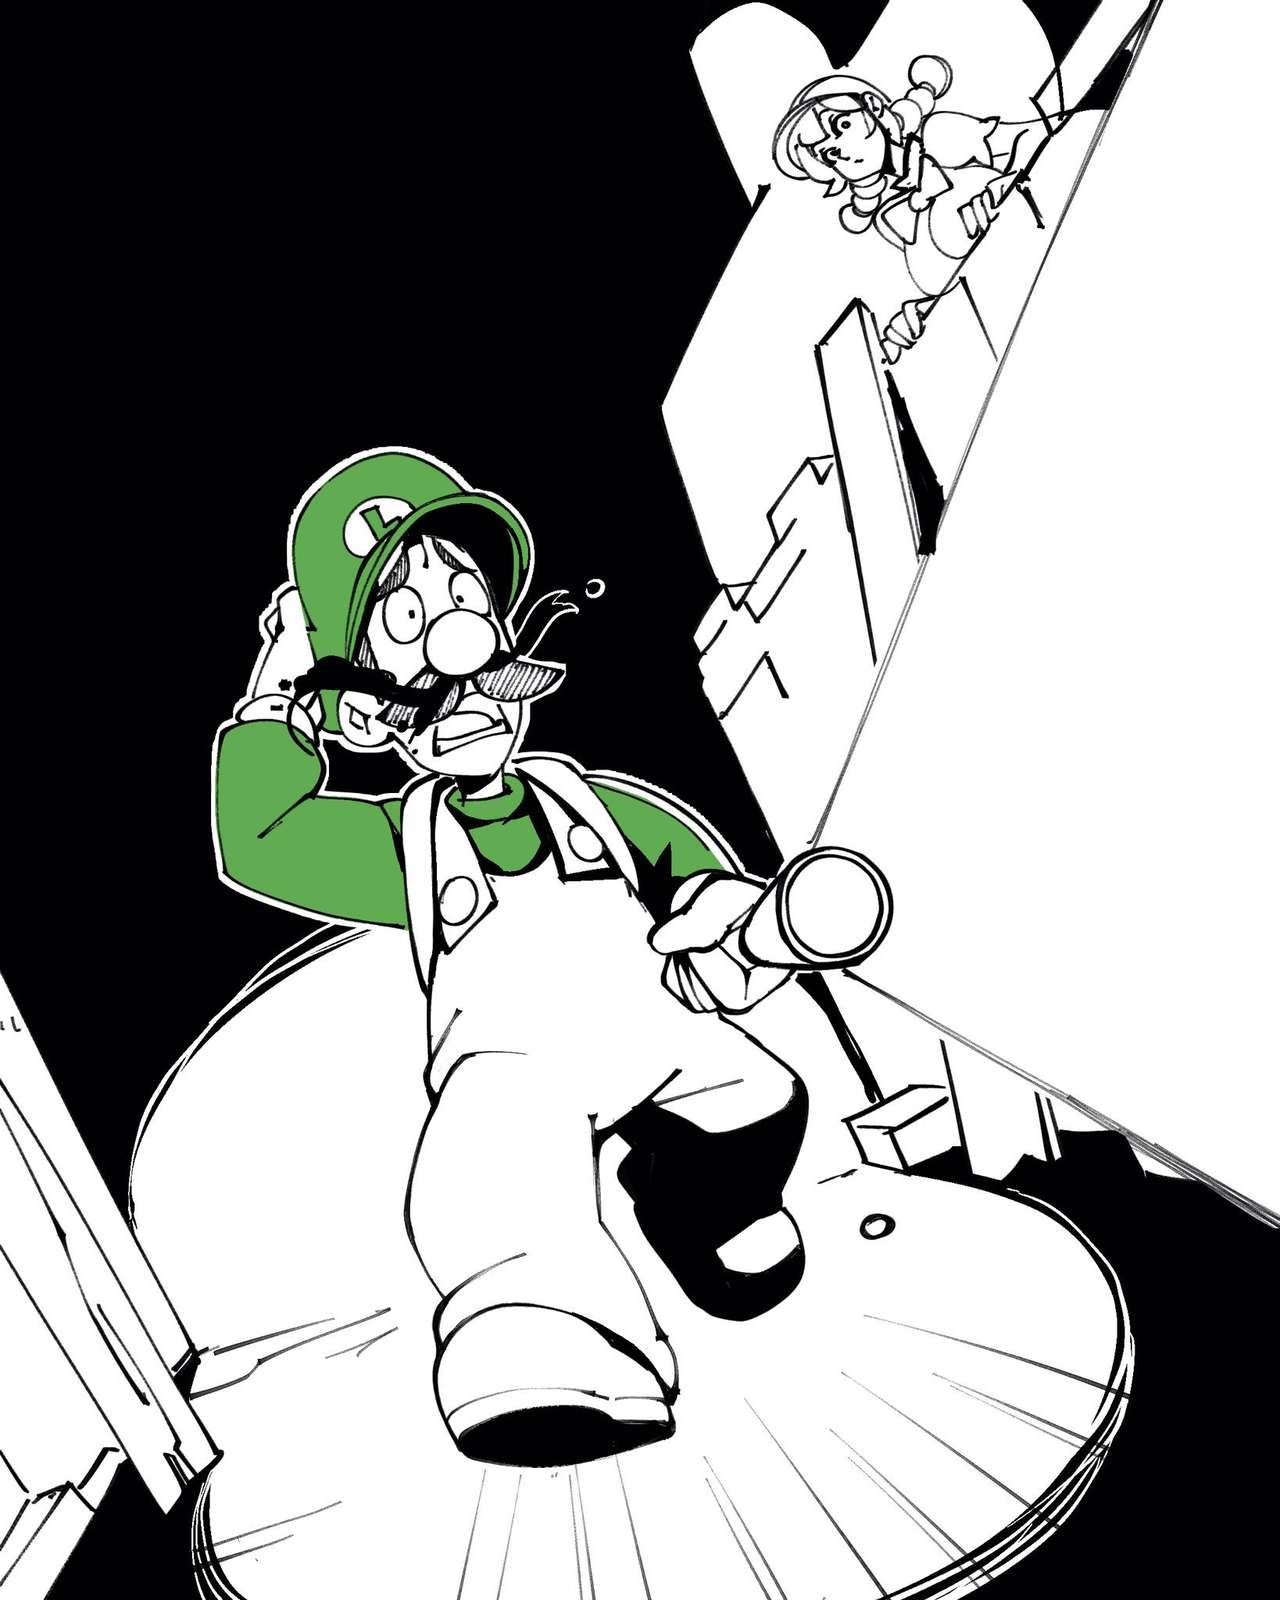 [Nisego] Inktober 2019 (Super Mario Brothers) [Ongoing] 20